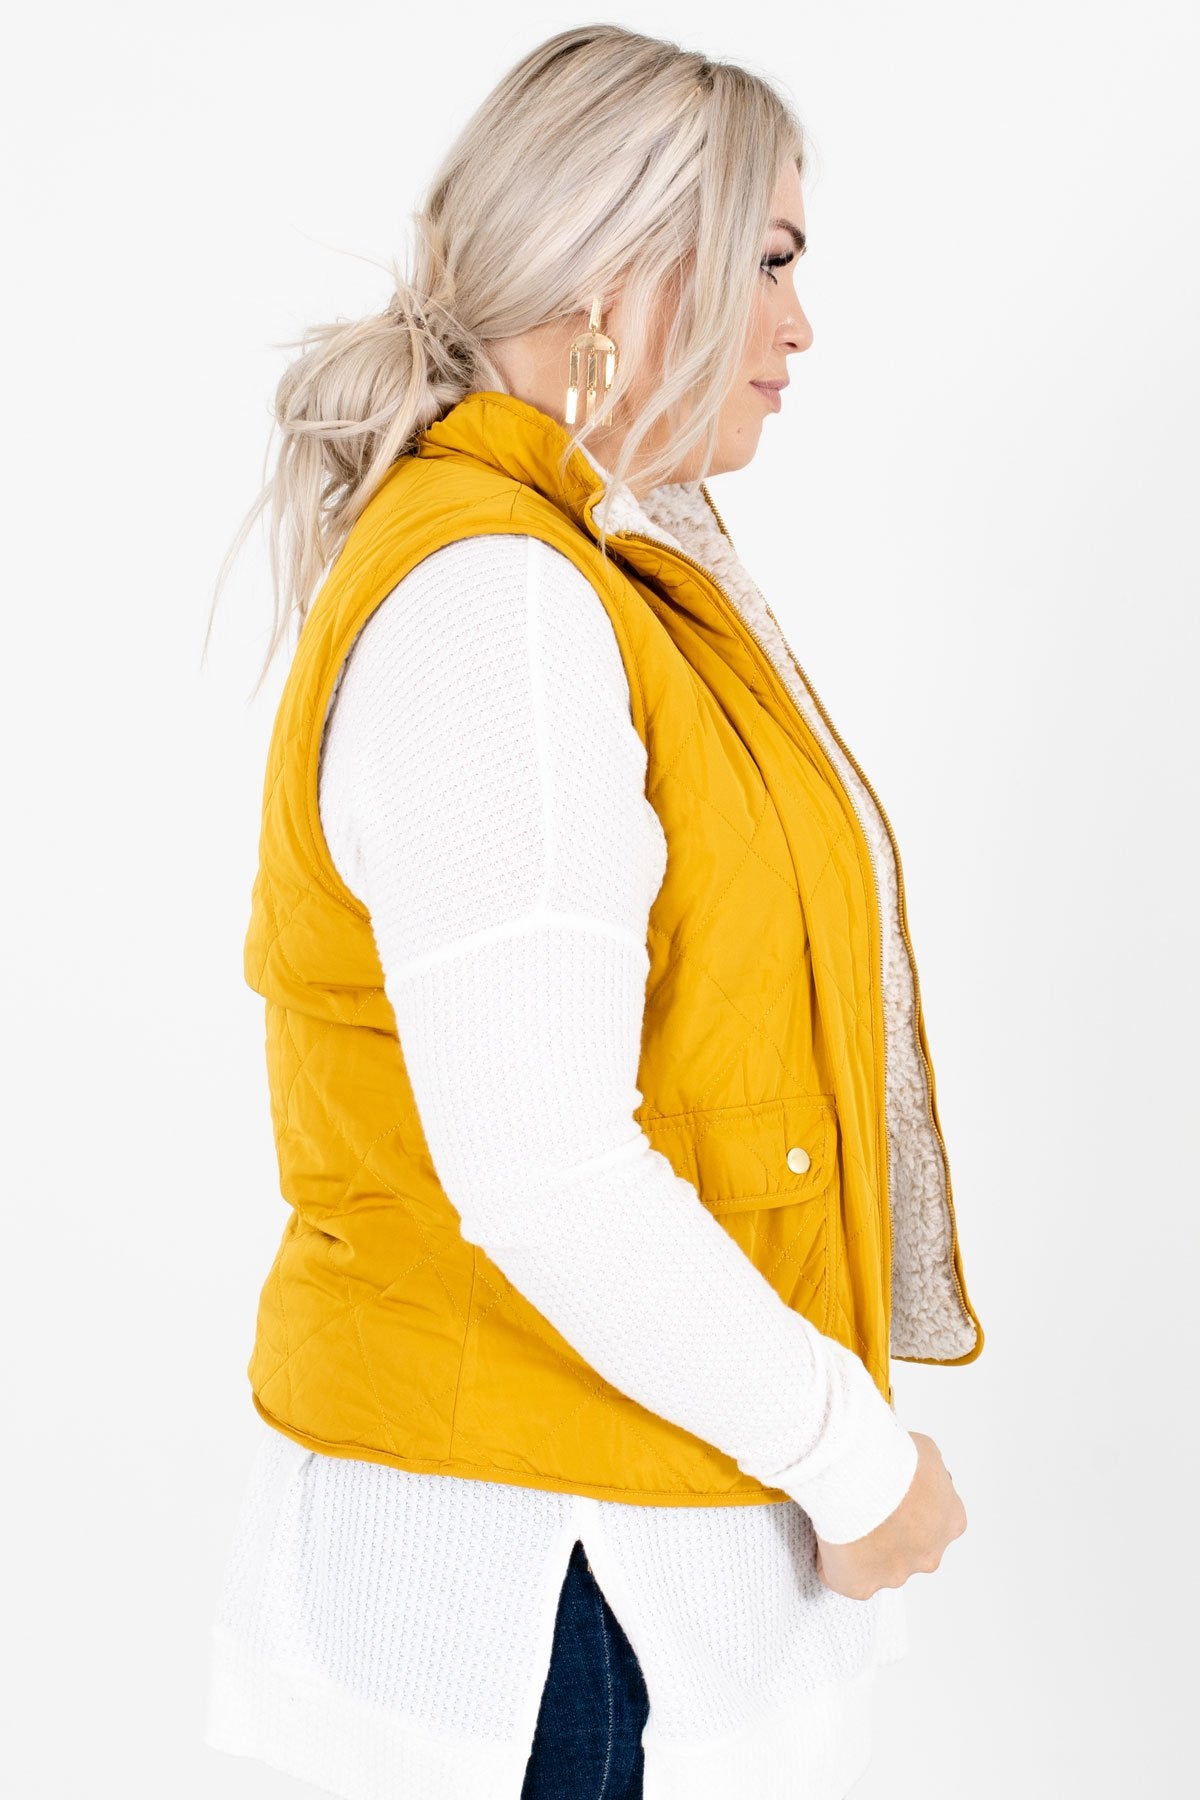 Mustard Yellow Zip-Up Front Boutique Vests for Women